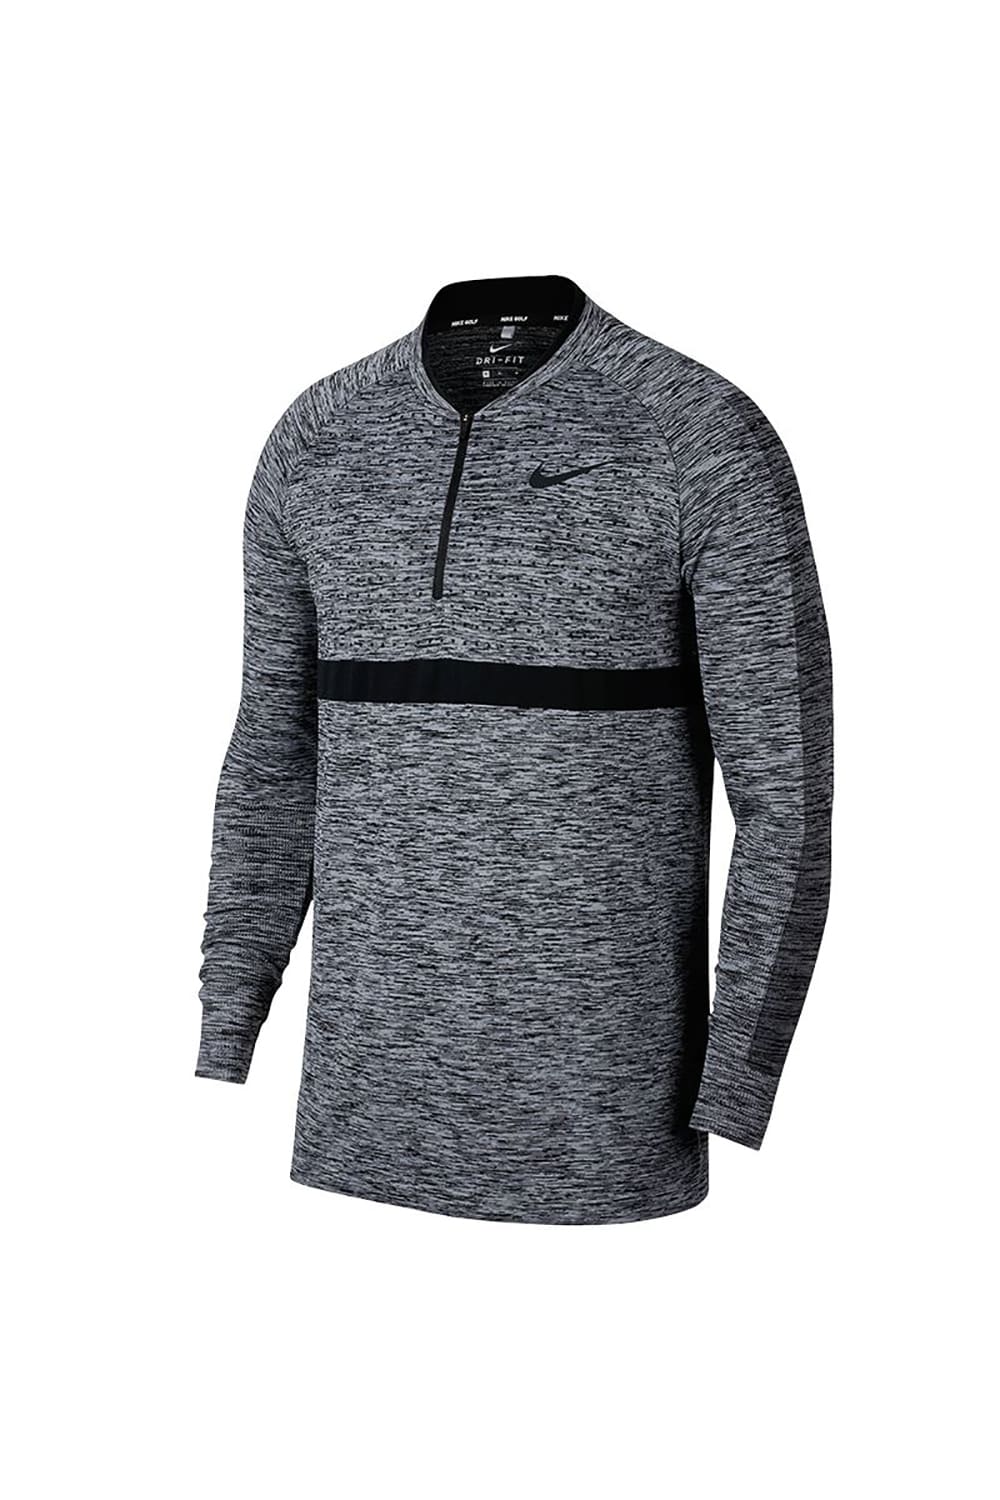 Nike Mens Seamless Knit Zip Long Sleeve Cover Top (Light Carbon/Thunderblue)